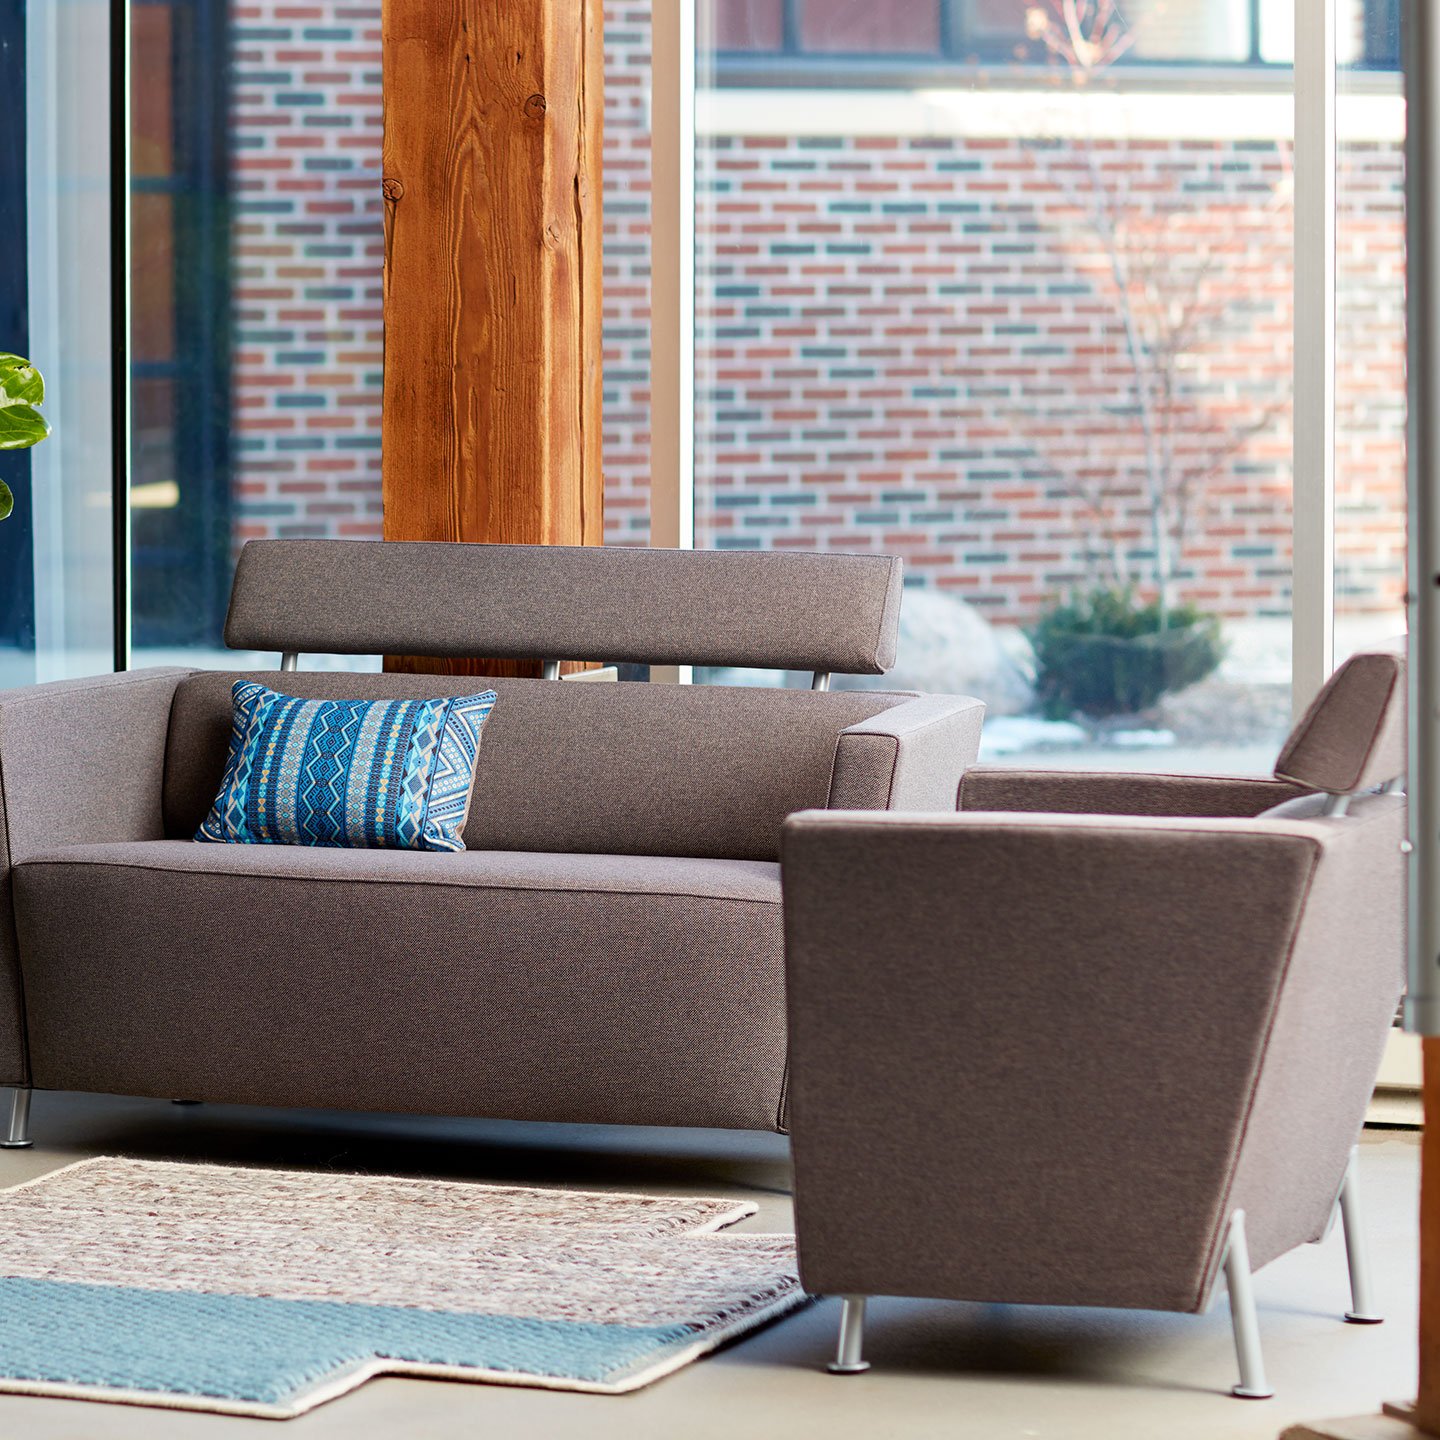 Haworth Hello lounge sofa in brown upholstery with Gan rug in a casual space